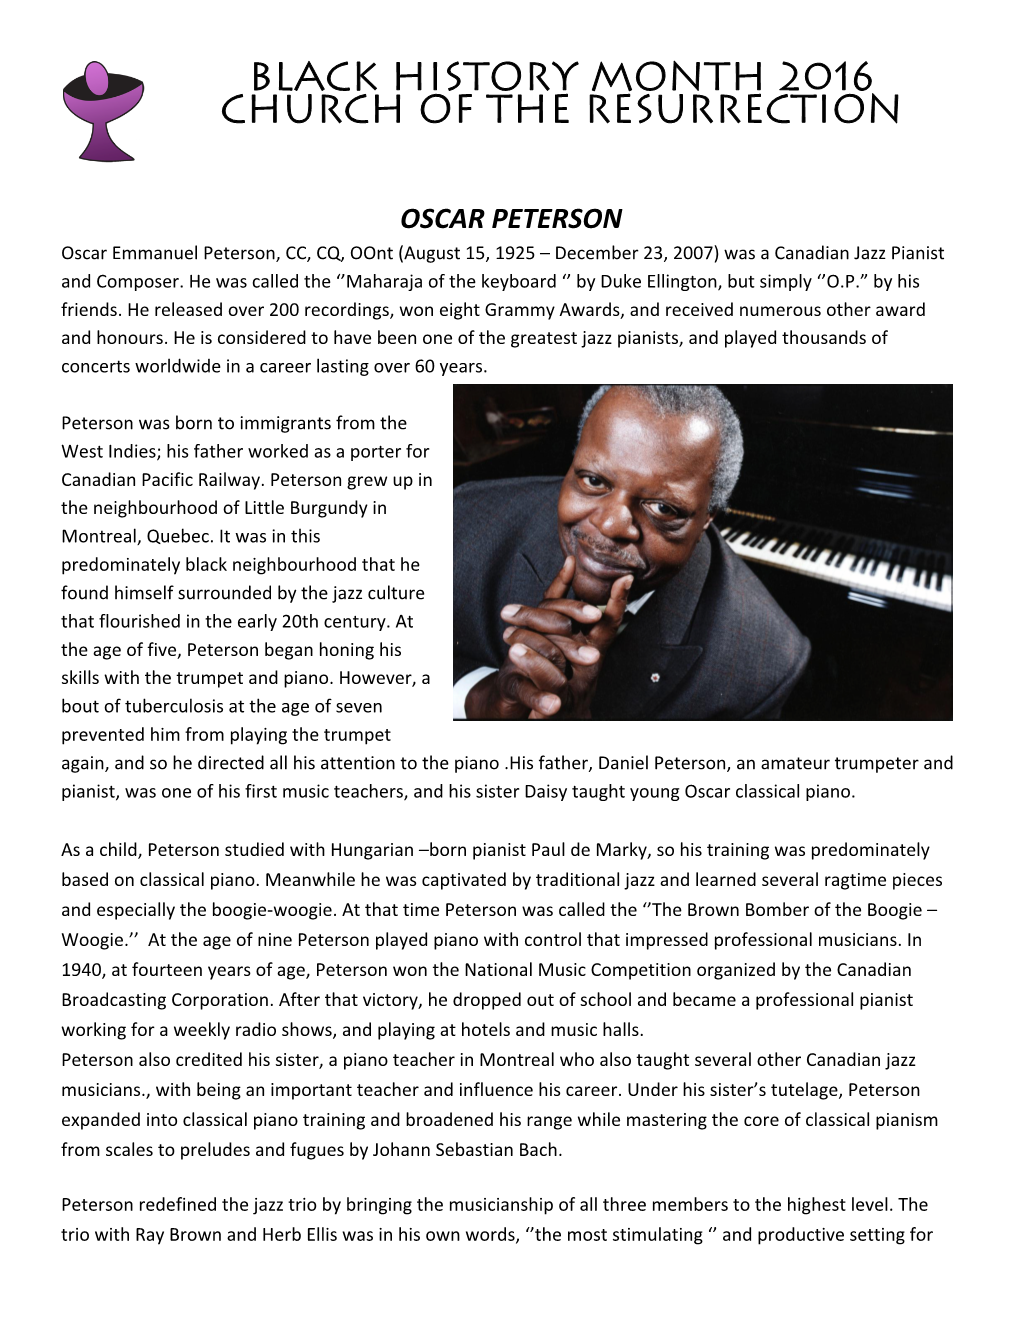 OSCAR PETERSON Oscar Emmanuel Peterson, CC, CQ, Oont (August 15, 1925 – December 23, 2007) Was a Canadian Jazz Pianist and Composer